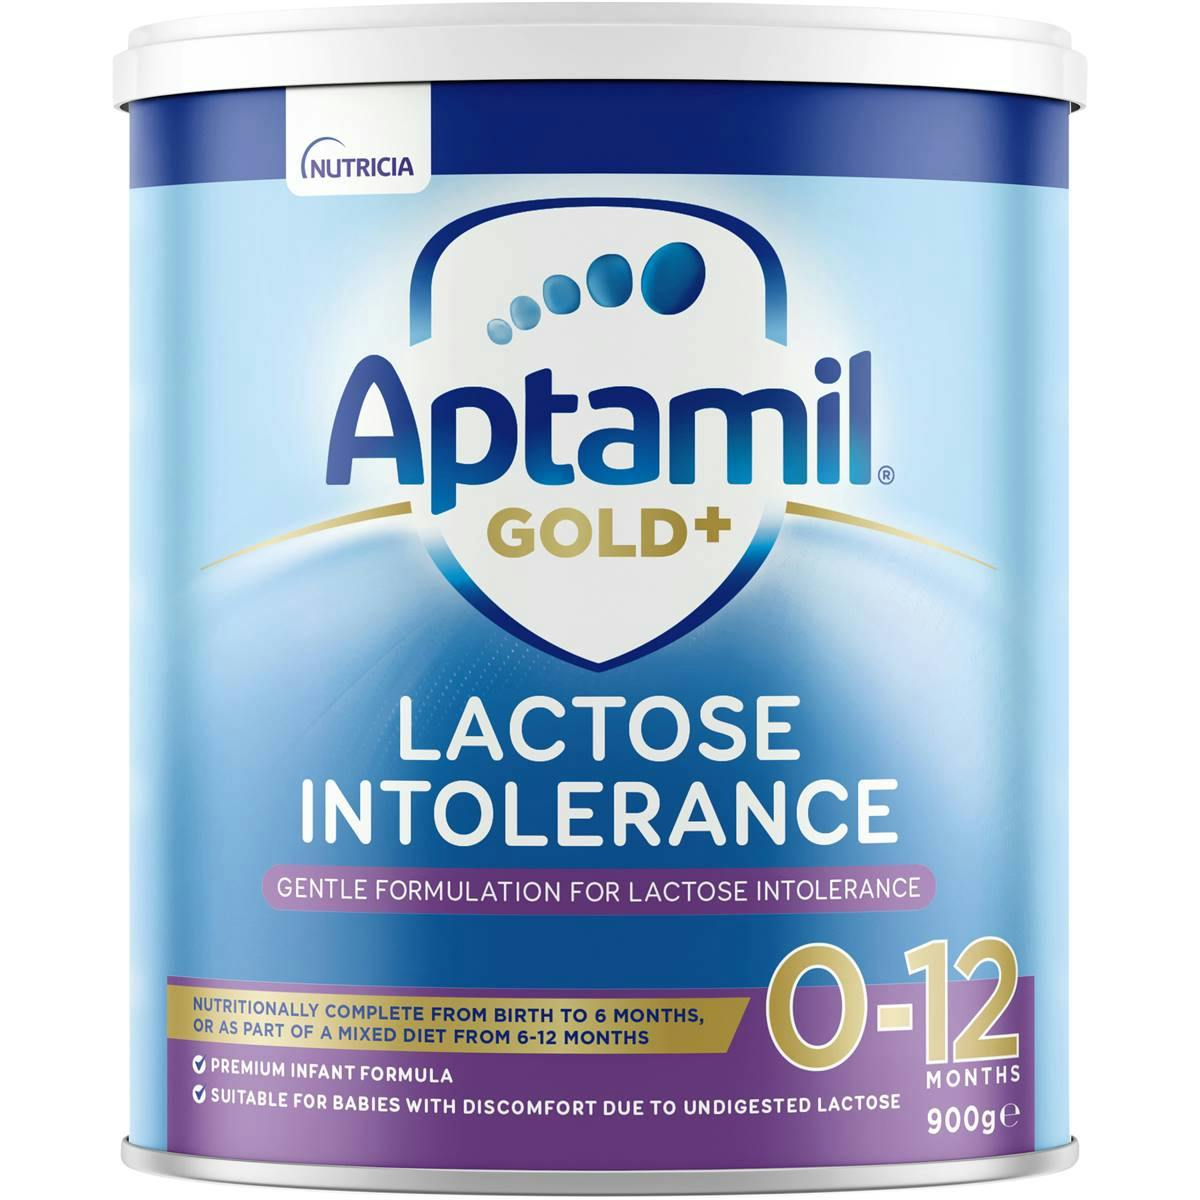 Aptamil Gold+ Lactose Intolerance Baby Formula From 0-12 Months